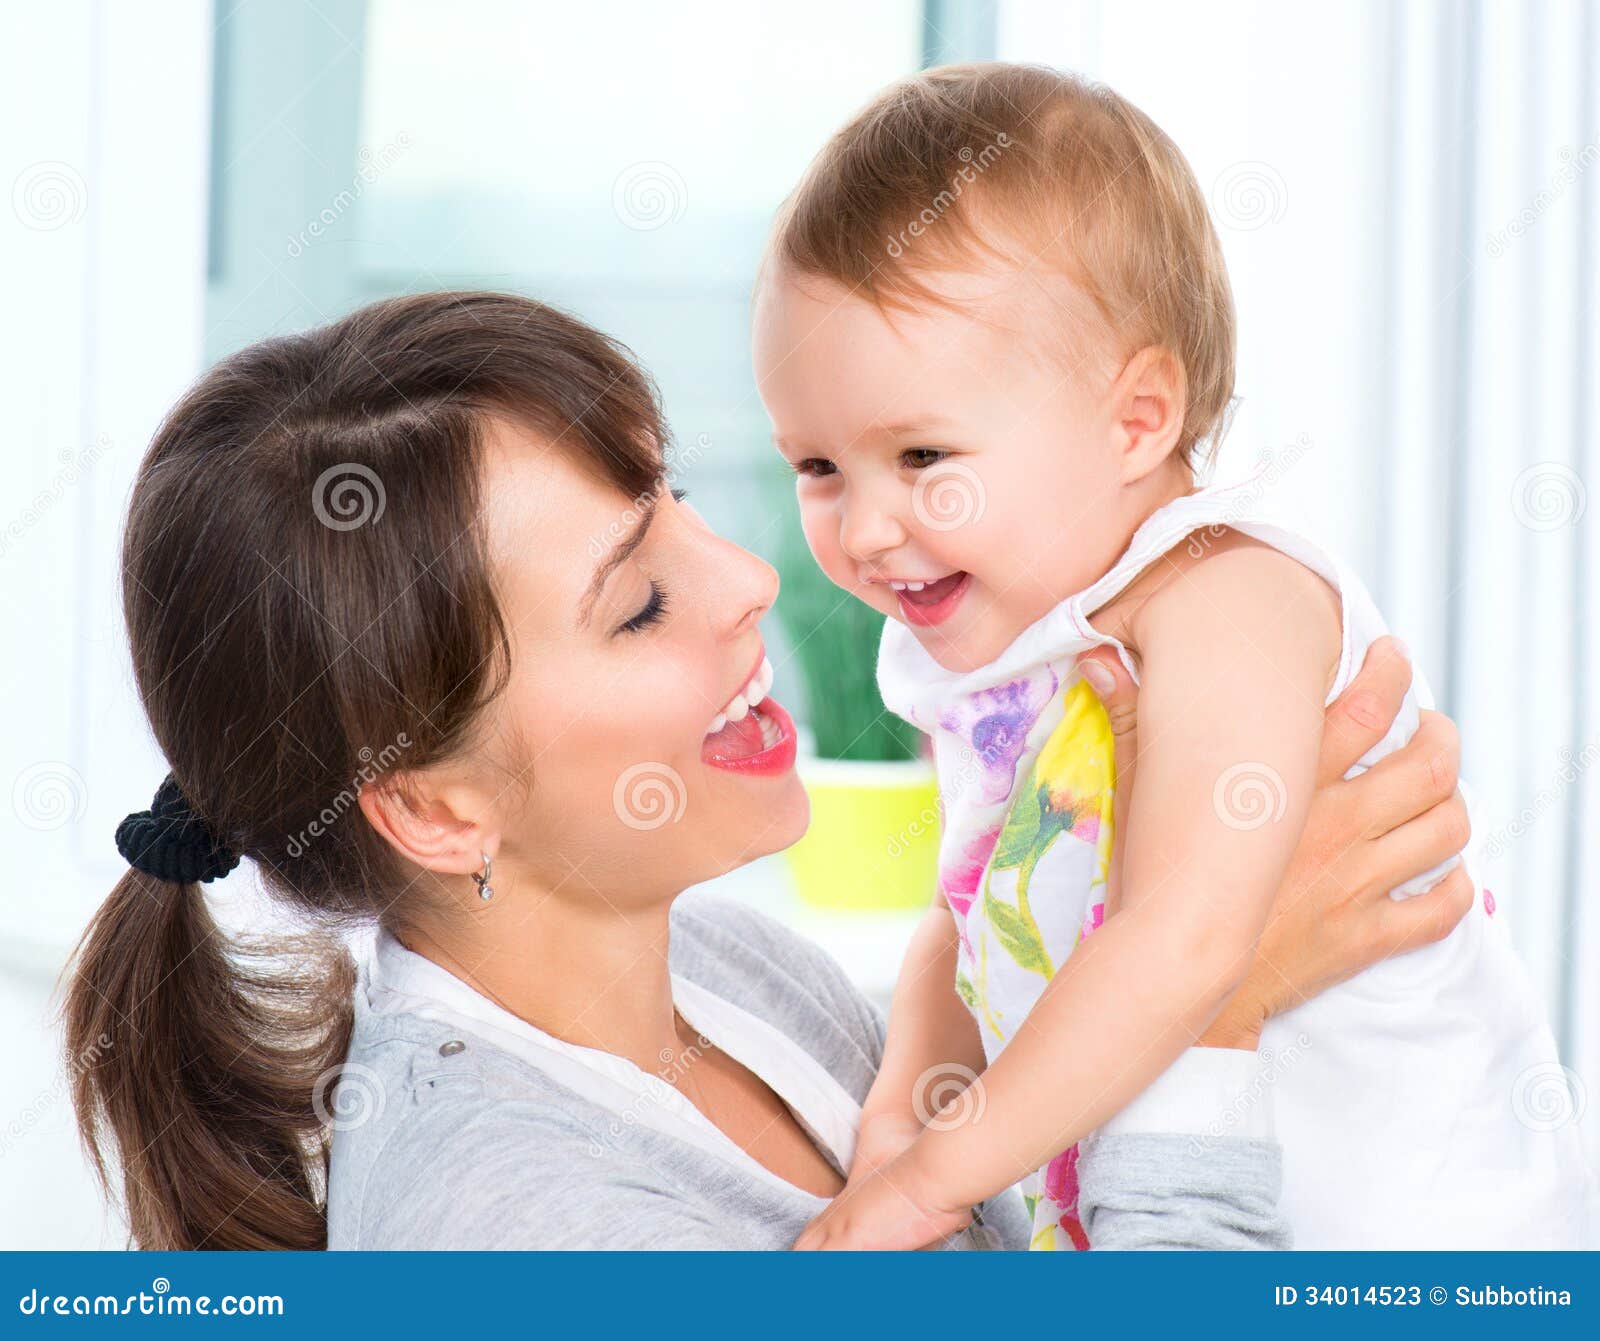 Happy Smiling Mother and Baby Stock Image - Image of care, joyful: 34014523